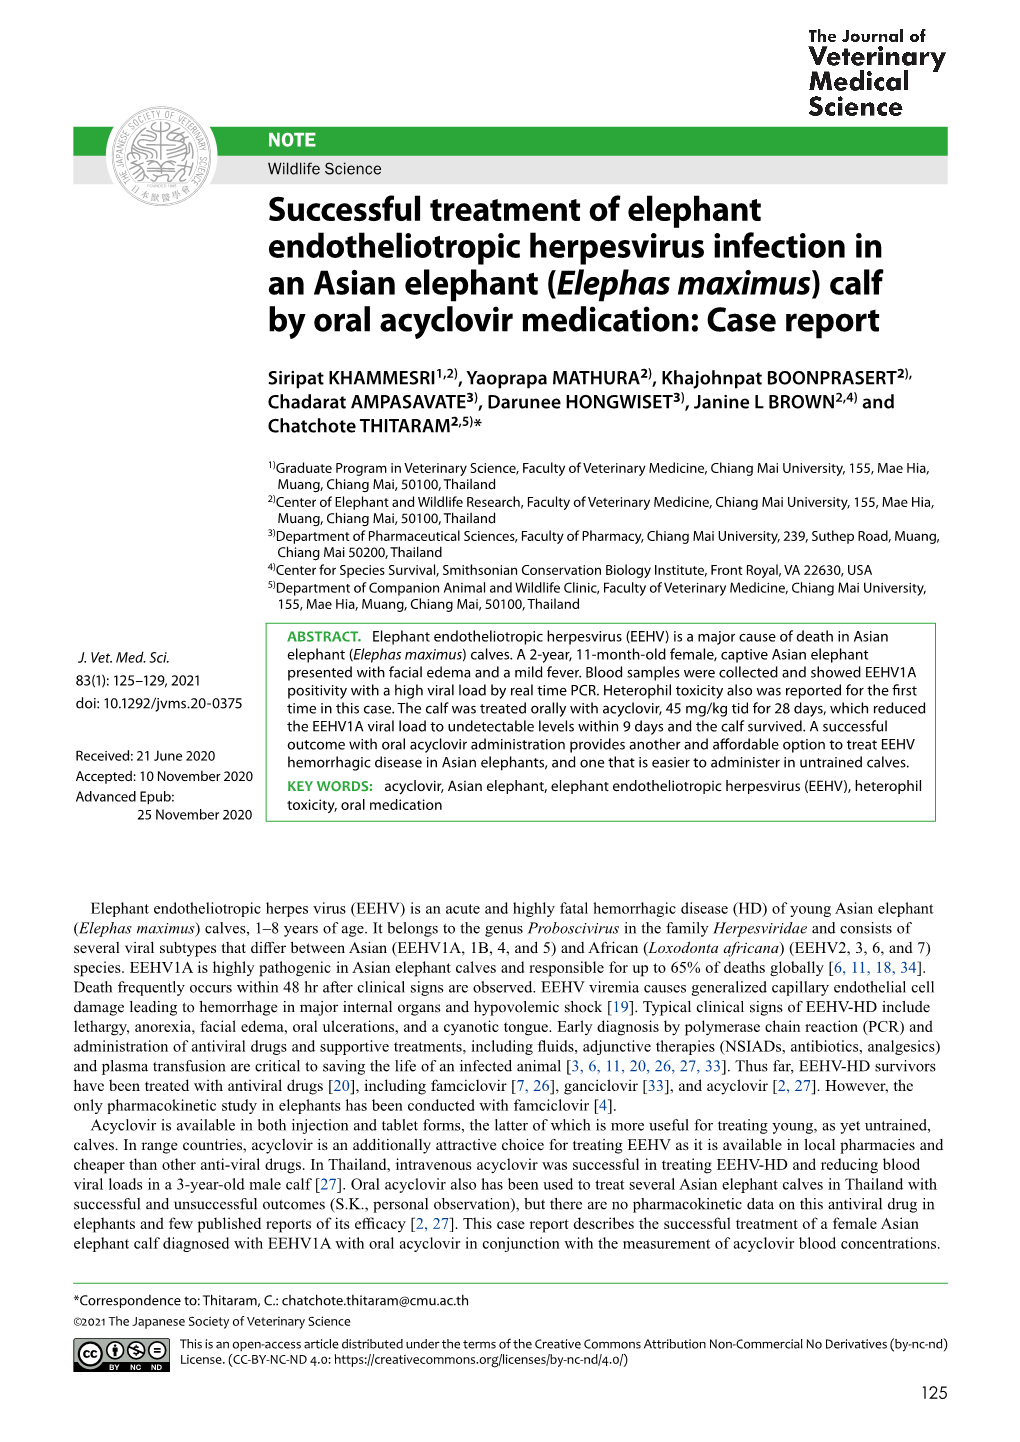 Successful Treatment of Elephant Endotheliotropic Herpesvirus Infection in an Asian Elephant (Elephas Maximus) Calf by Oral Acyclovir Medication: Case Report